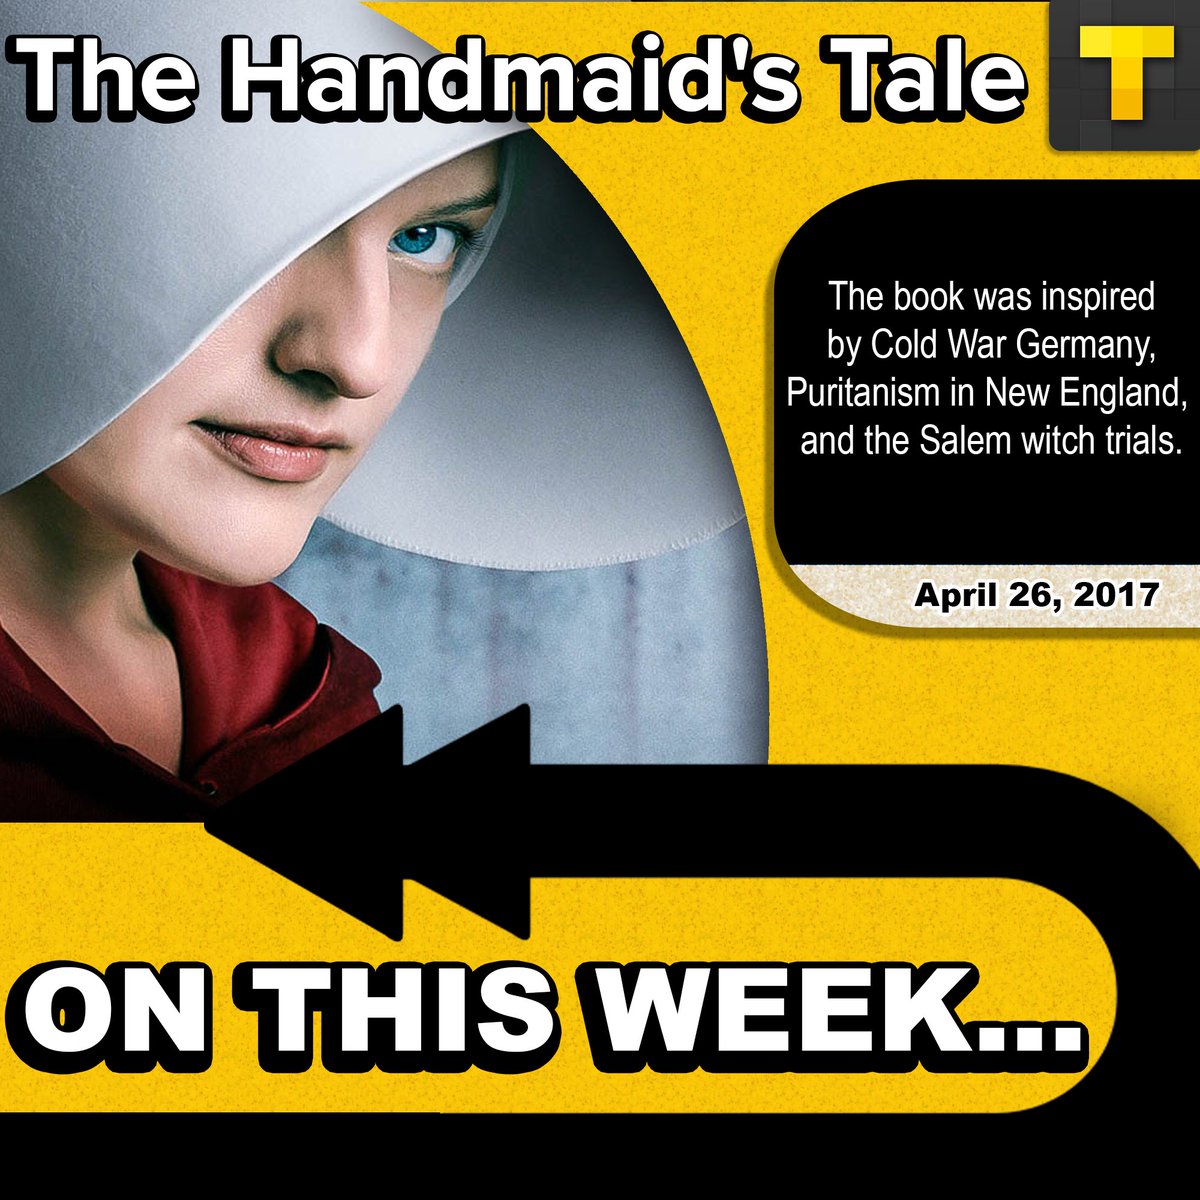 In 2017, 'The Handmaid's Tale' debuted on Hulu, making waves in television. Don't forget to engage with and track its episodes on TV Time. #TVTime